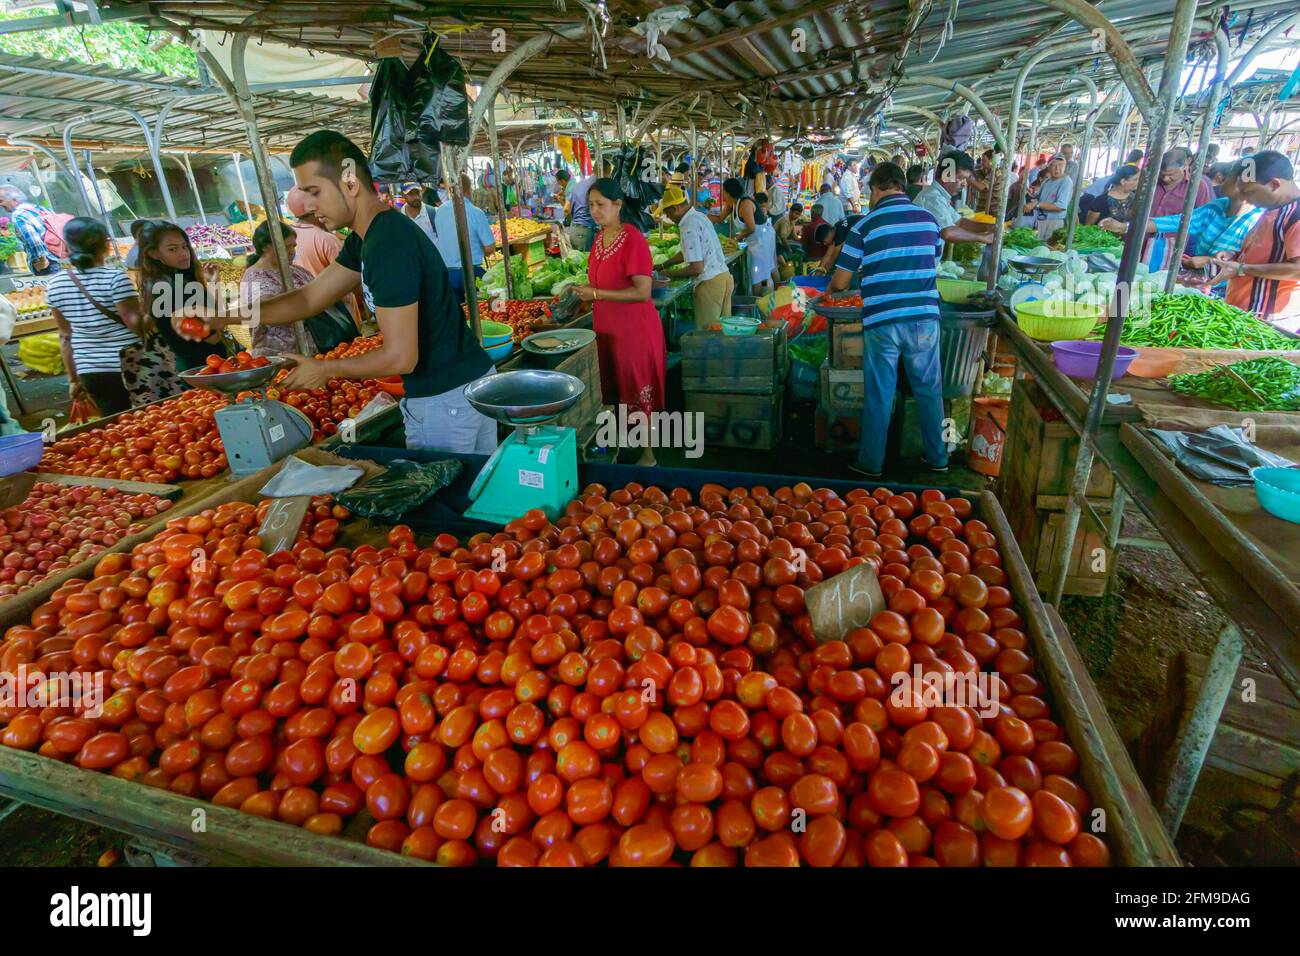 Mauritius island, December 2015 - Local buyers and sellers at a traditional open vegetable market  Stock Photo